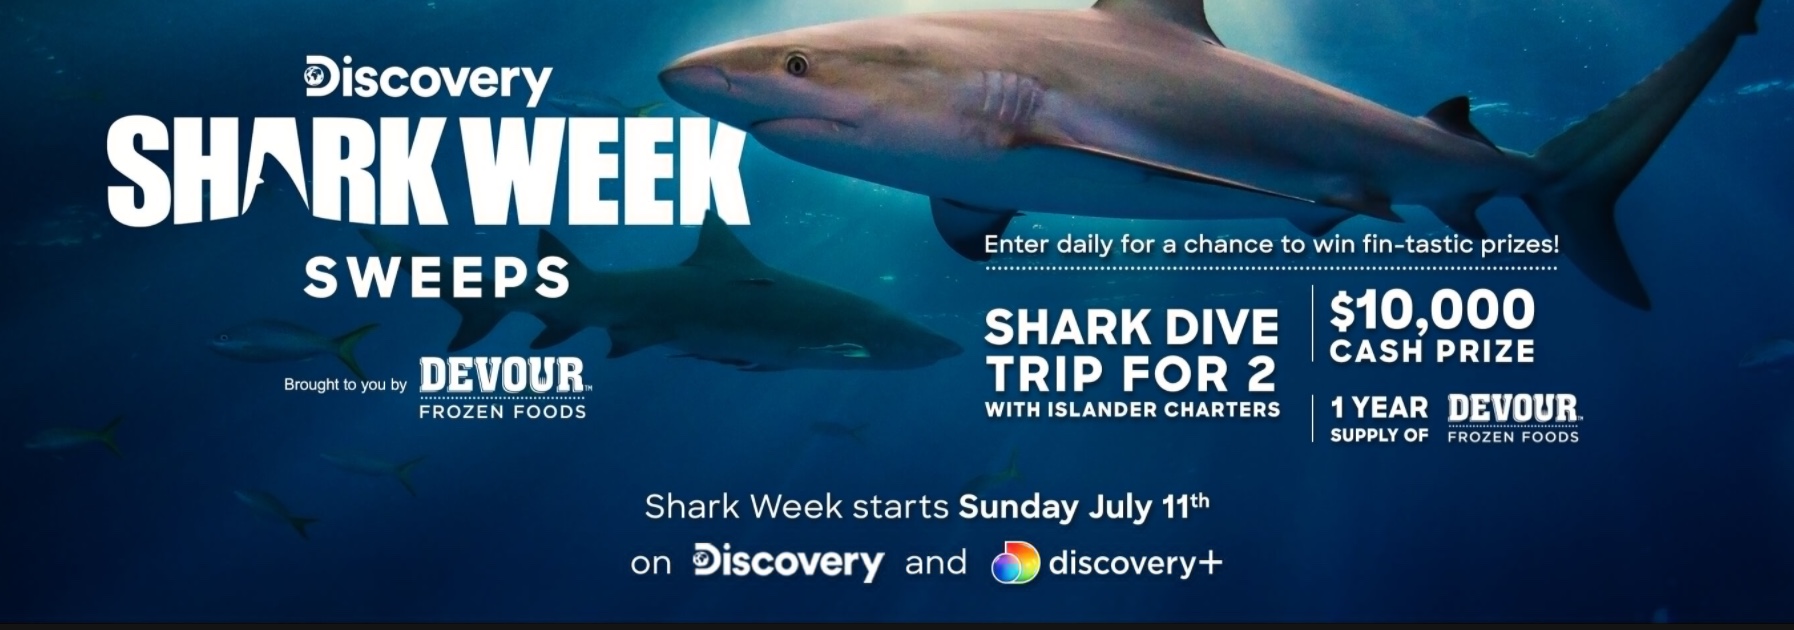 Discovery Shark Week Sweepstakes I Love Giveaways